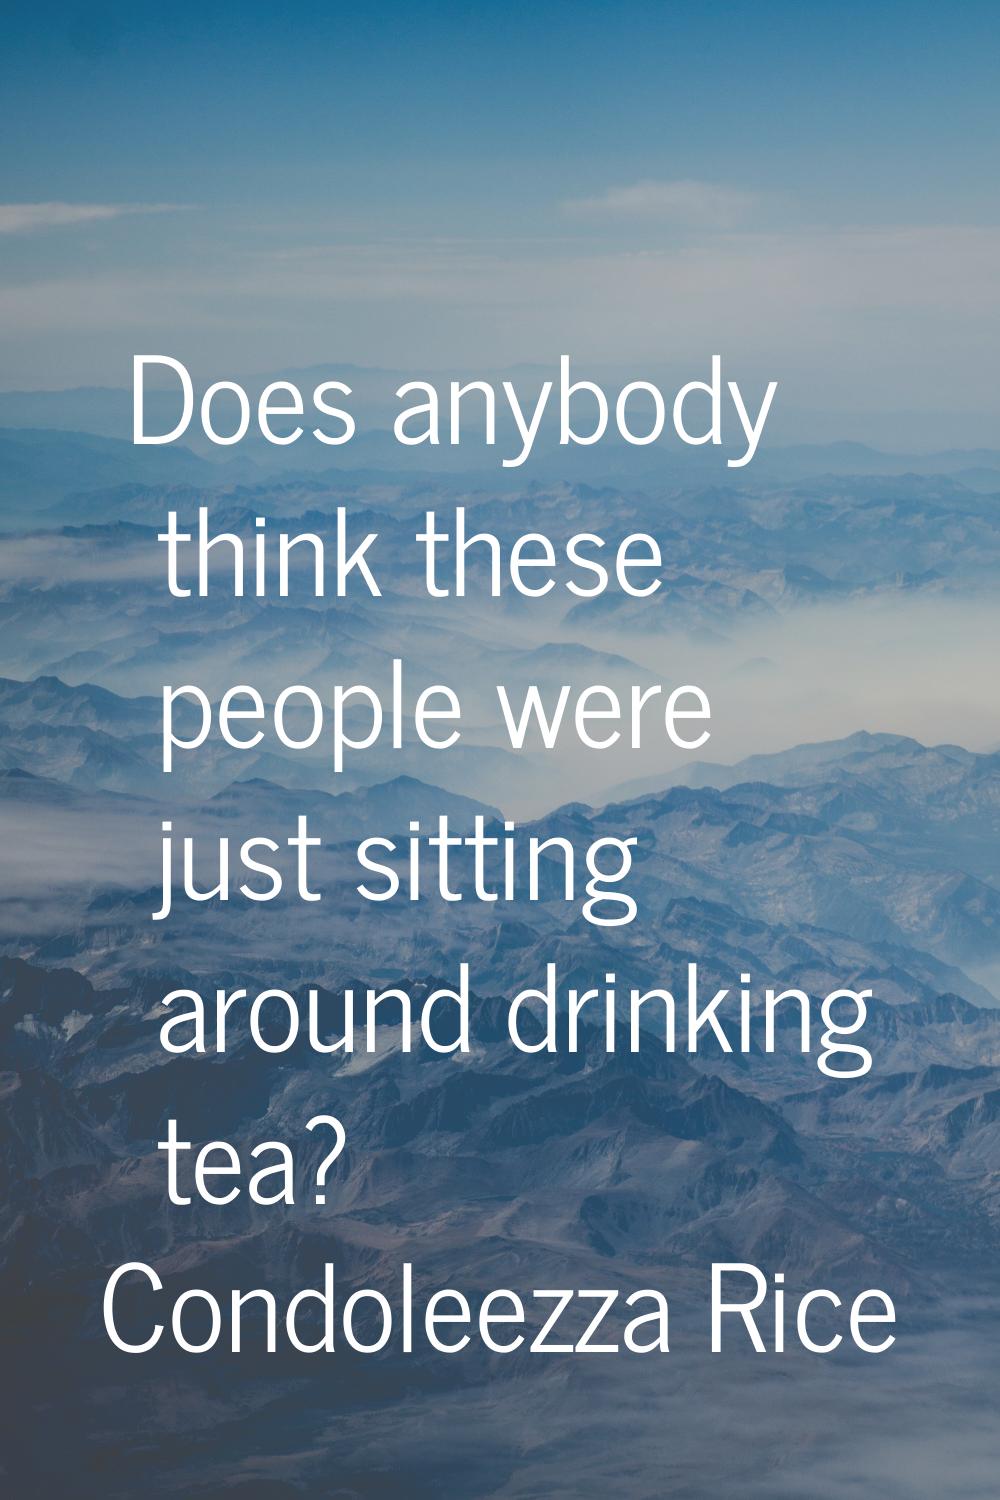 Does anybody think these people were just sitting around drinking tea?